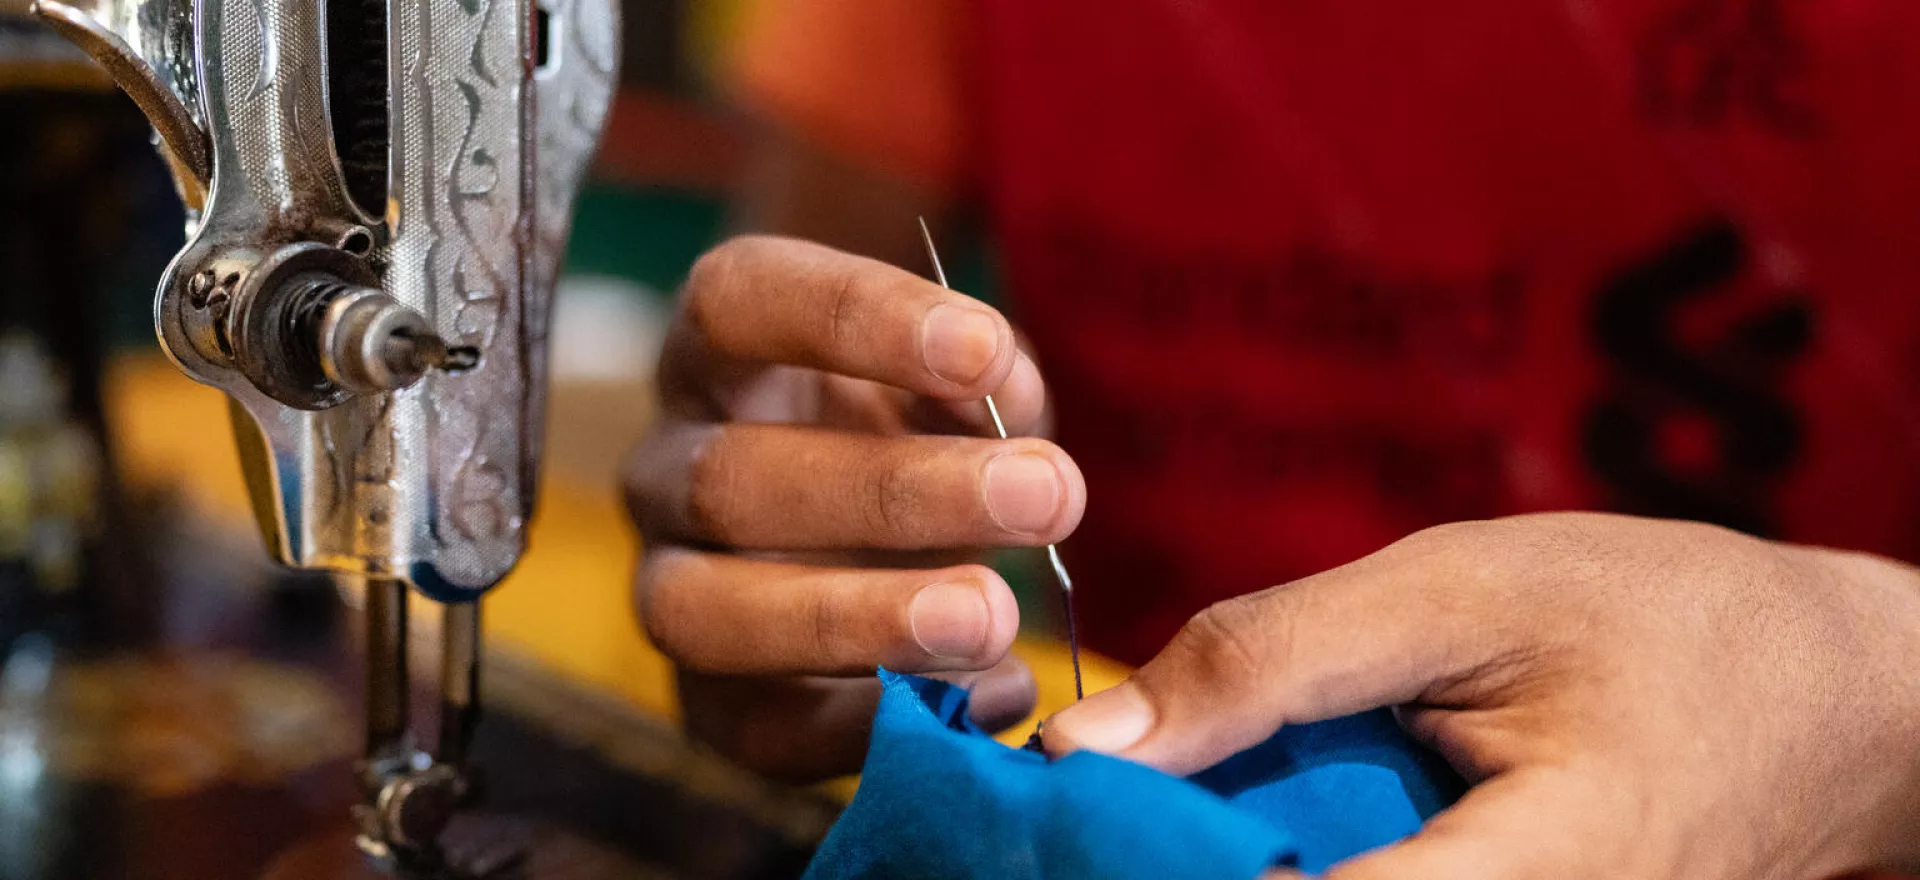 Bangladesh. A boy sews an item of clothing as part of a tailoring workshop at a Multi-Purpose Centre in a Rohingya refugee camp in Cox’s Bazar, Bangladesh